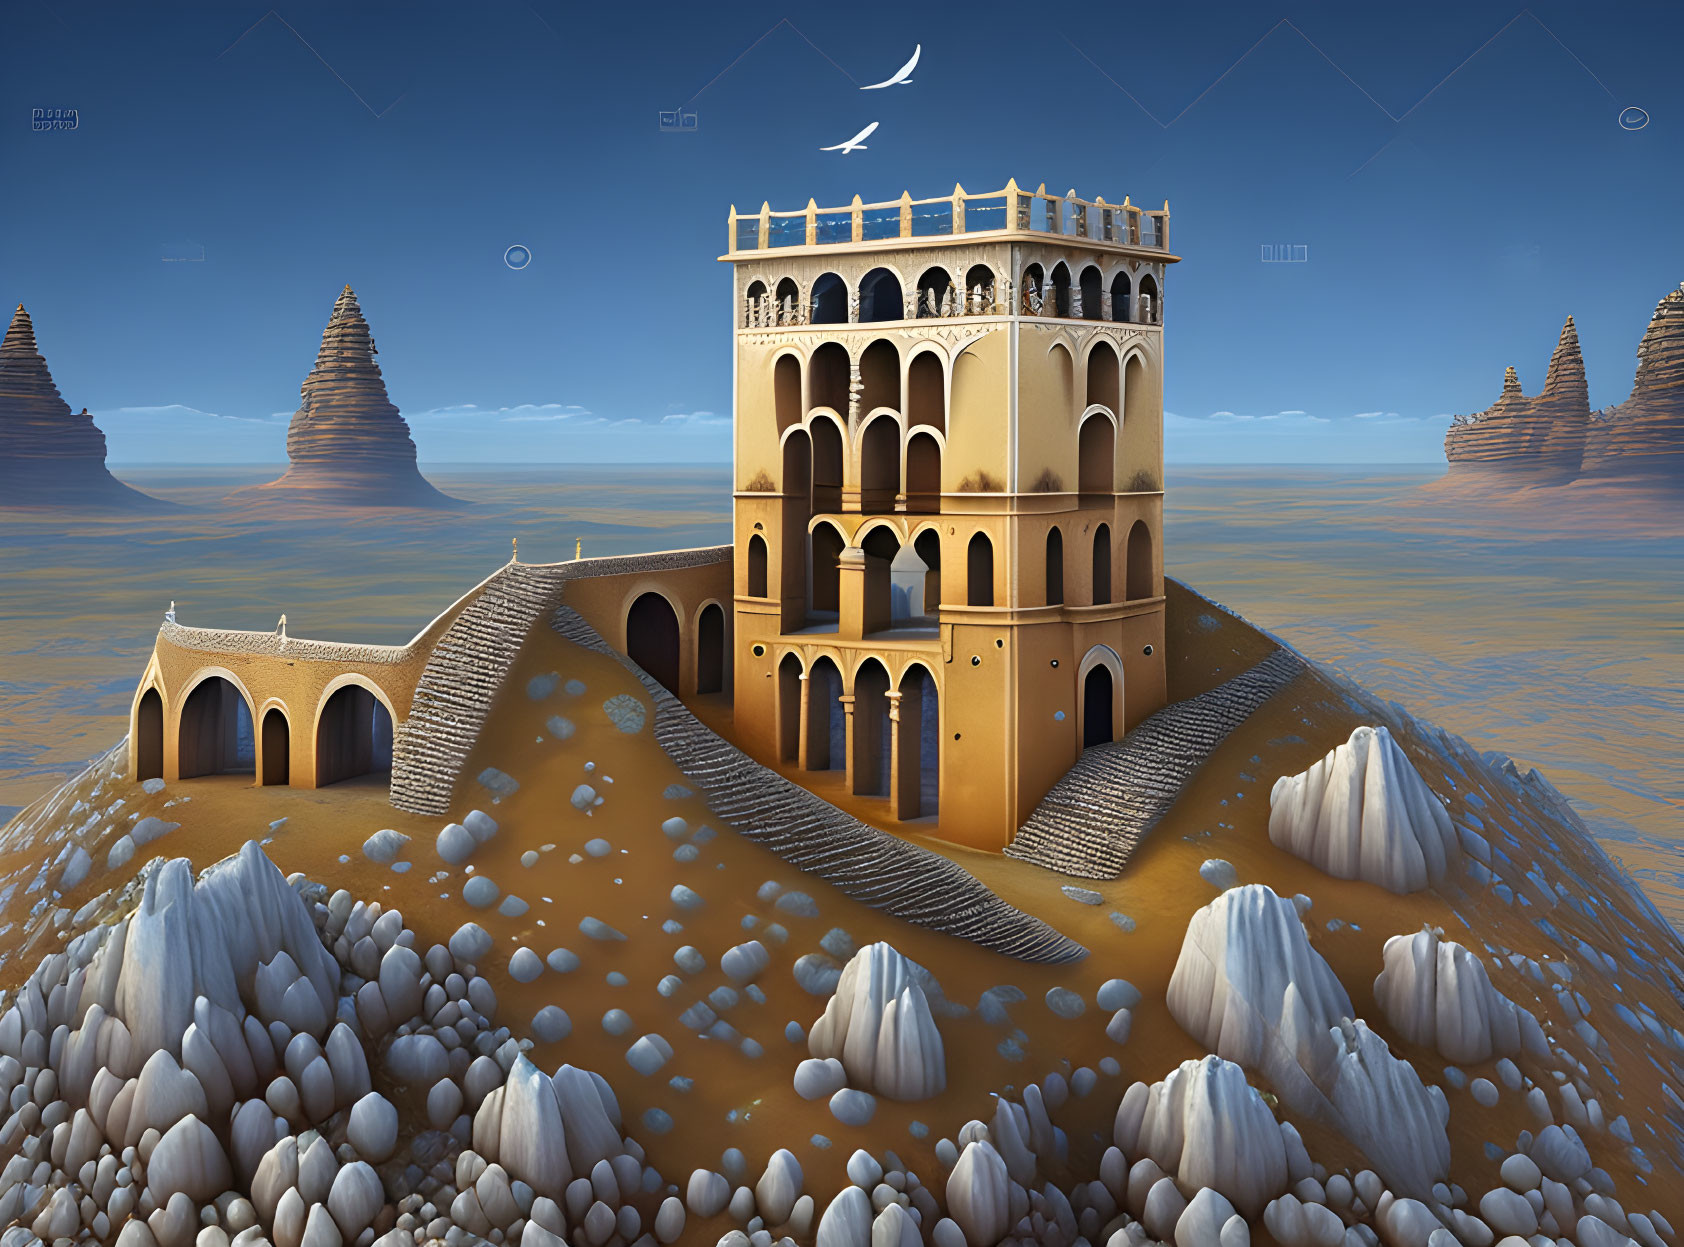 Surreal illustration of multi-tiered tower on sandy mound with arches and rock formations under twilight